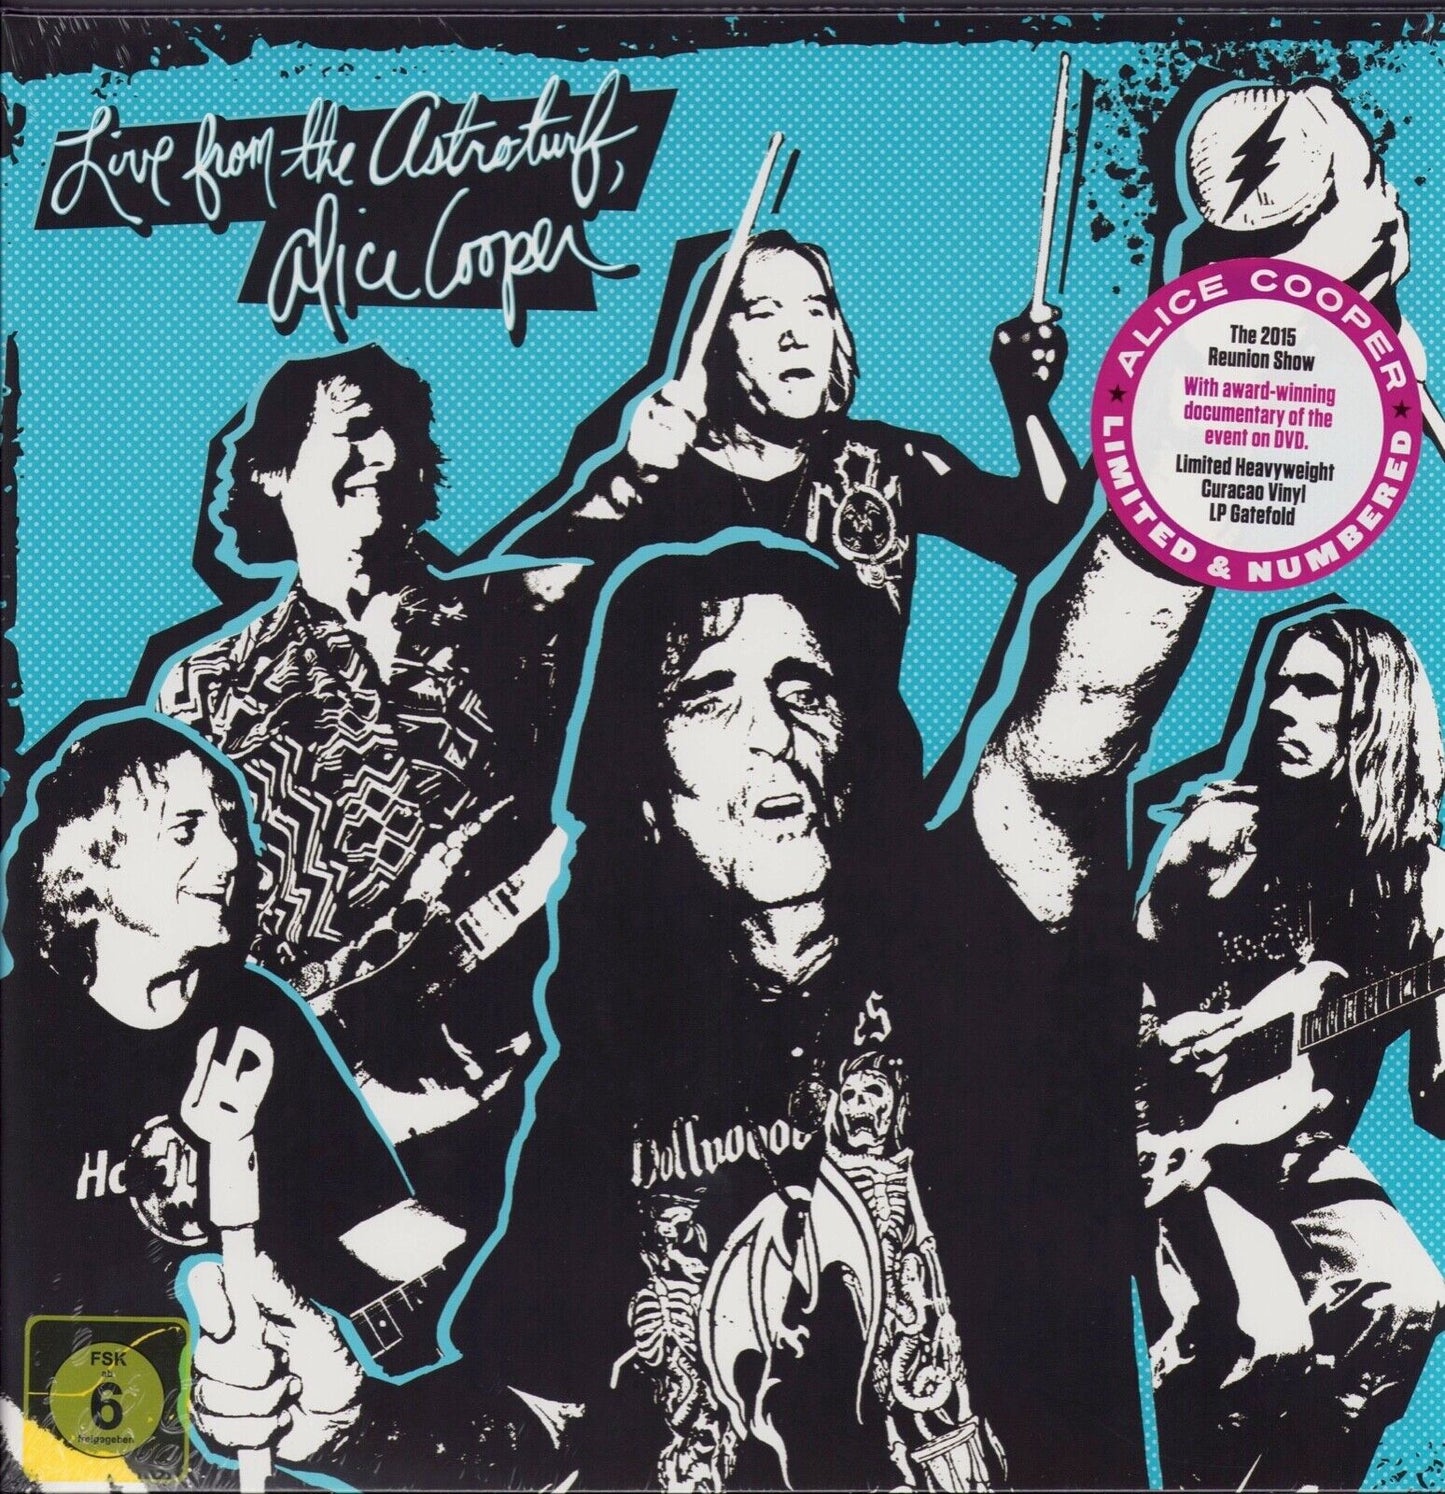 Alice Cooper ‎- Live From The Astroturf Curacao Vinyl LP + DVD Limited Edition